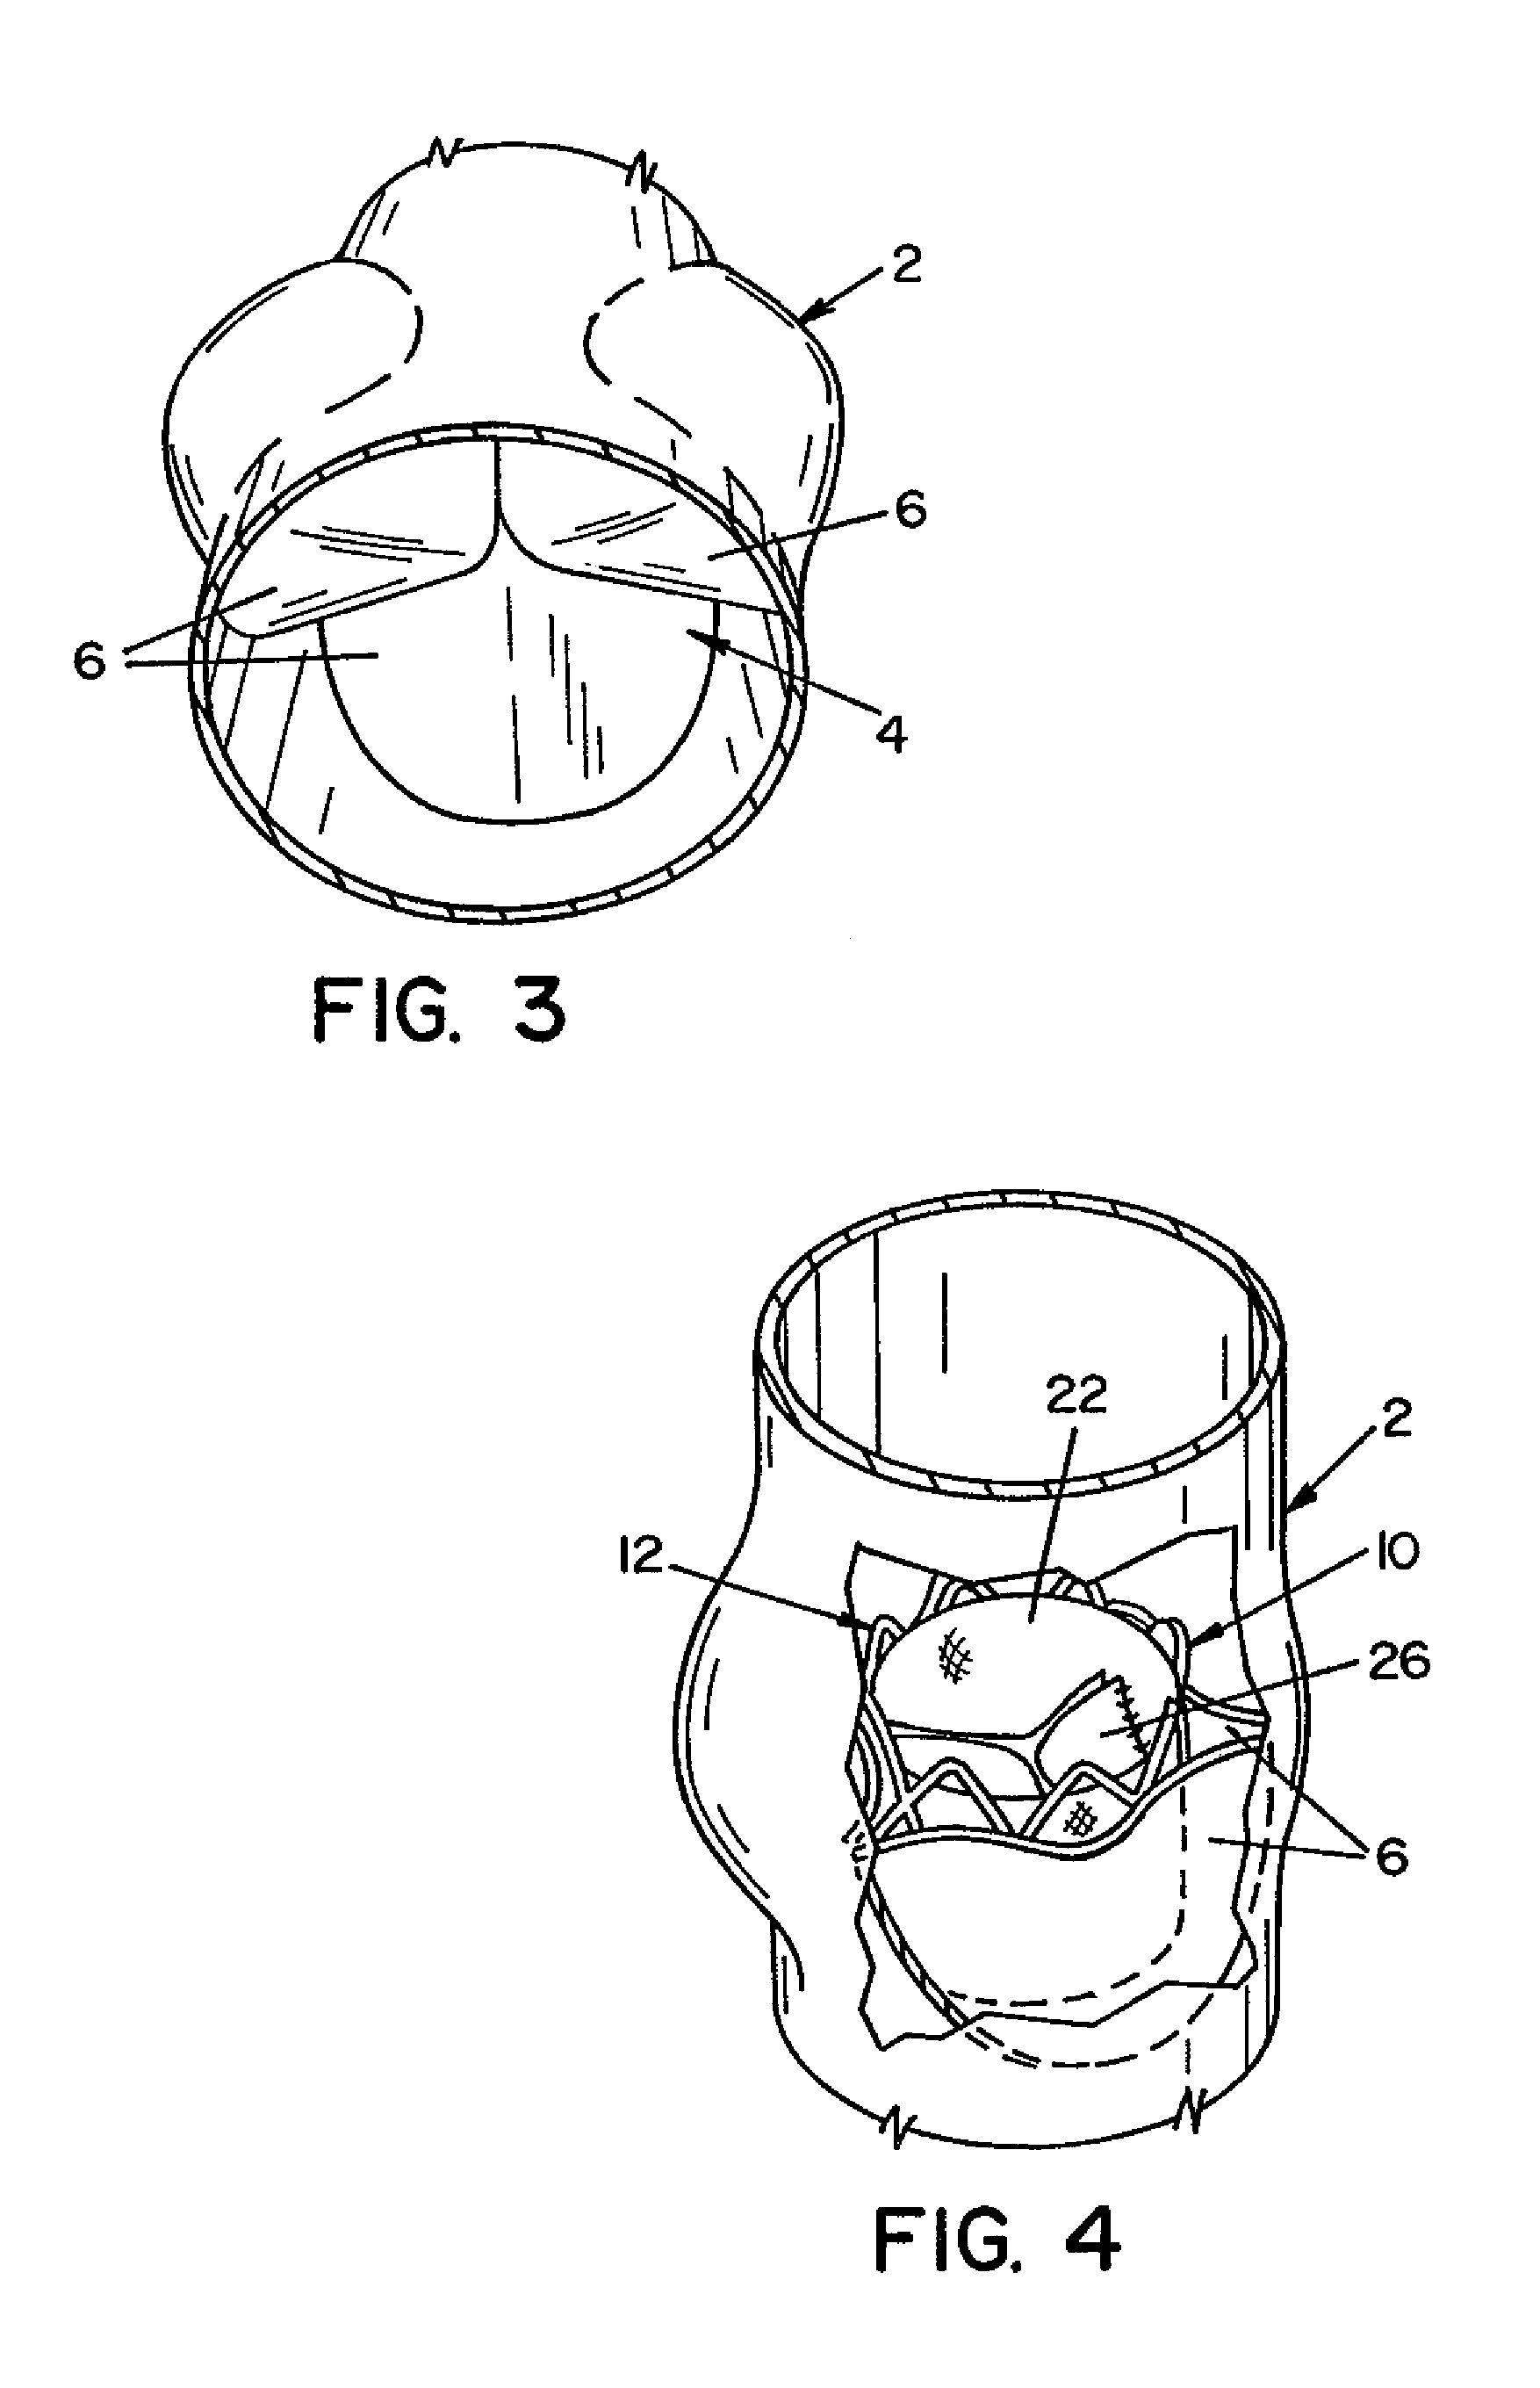 Method and apparatus for prosthetic valve removal